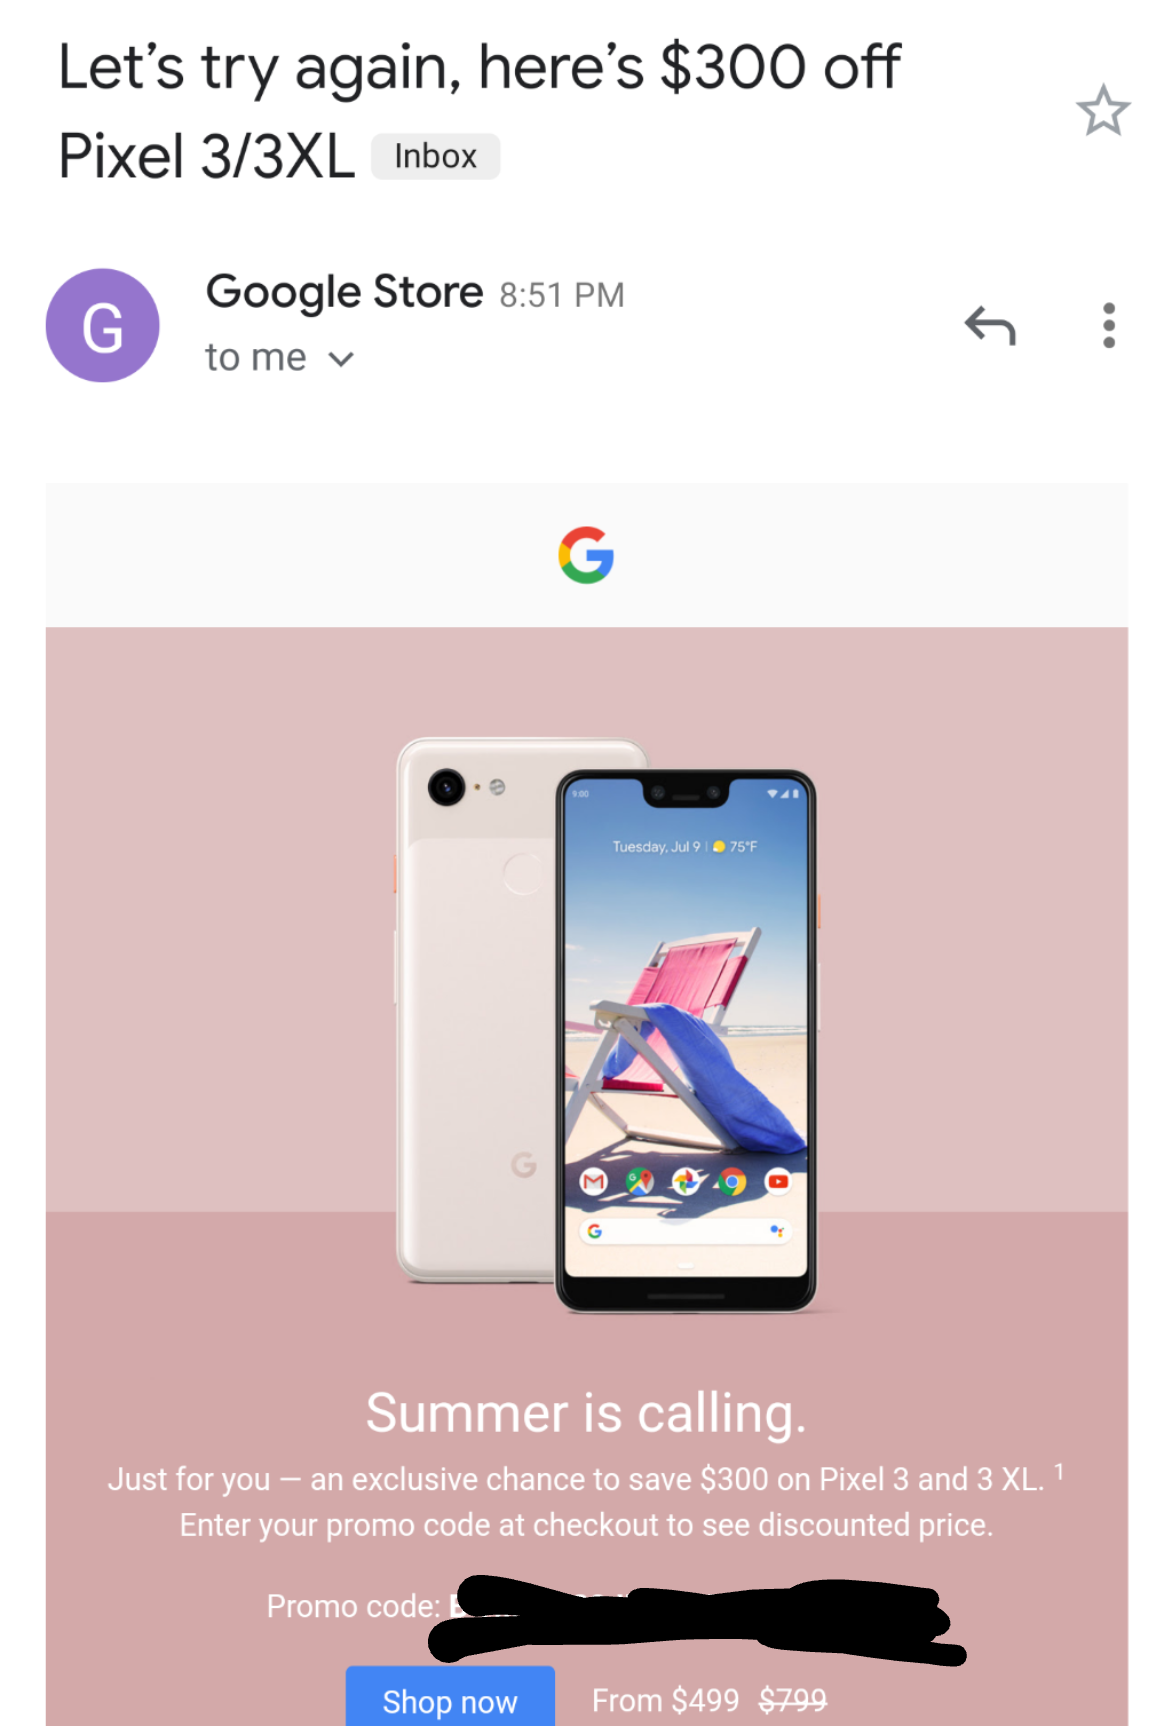 Google Store promo code discount Pixel 3 by 300 9to5Google